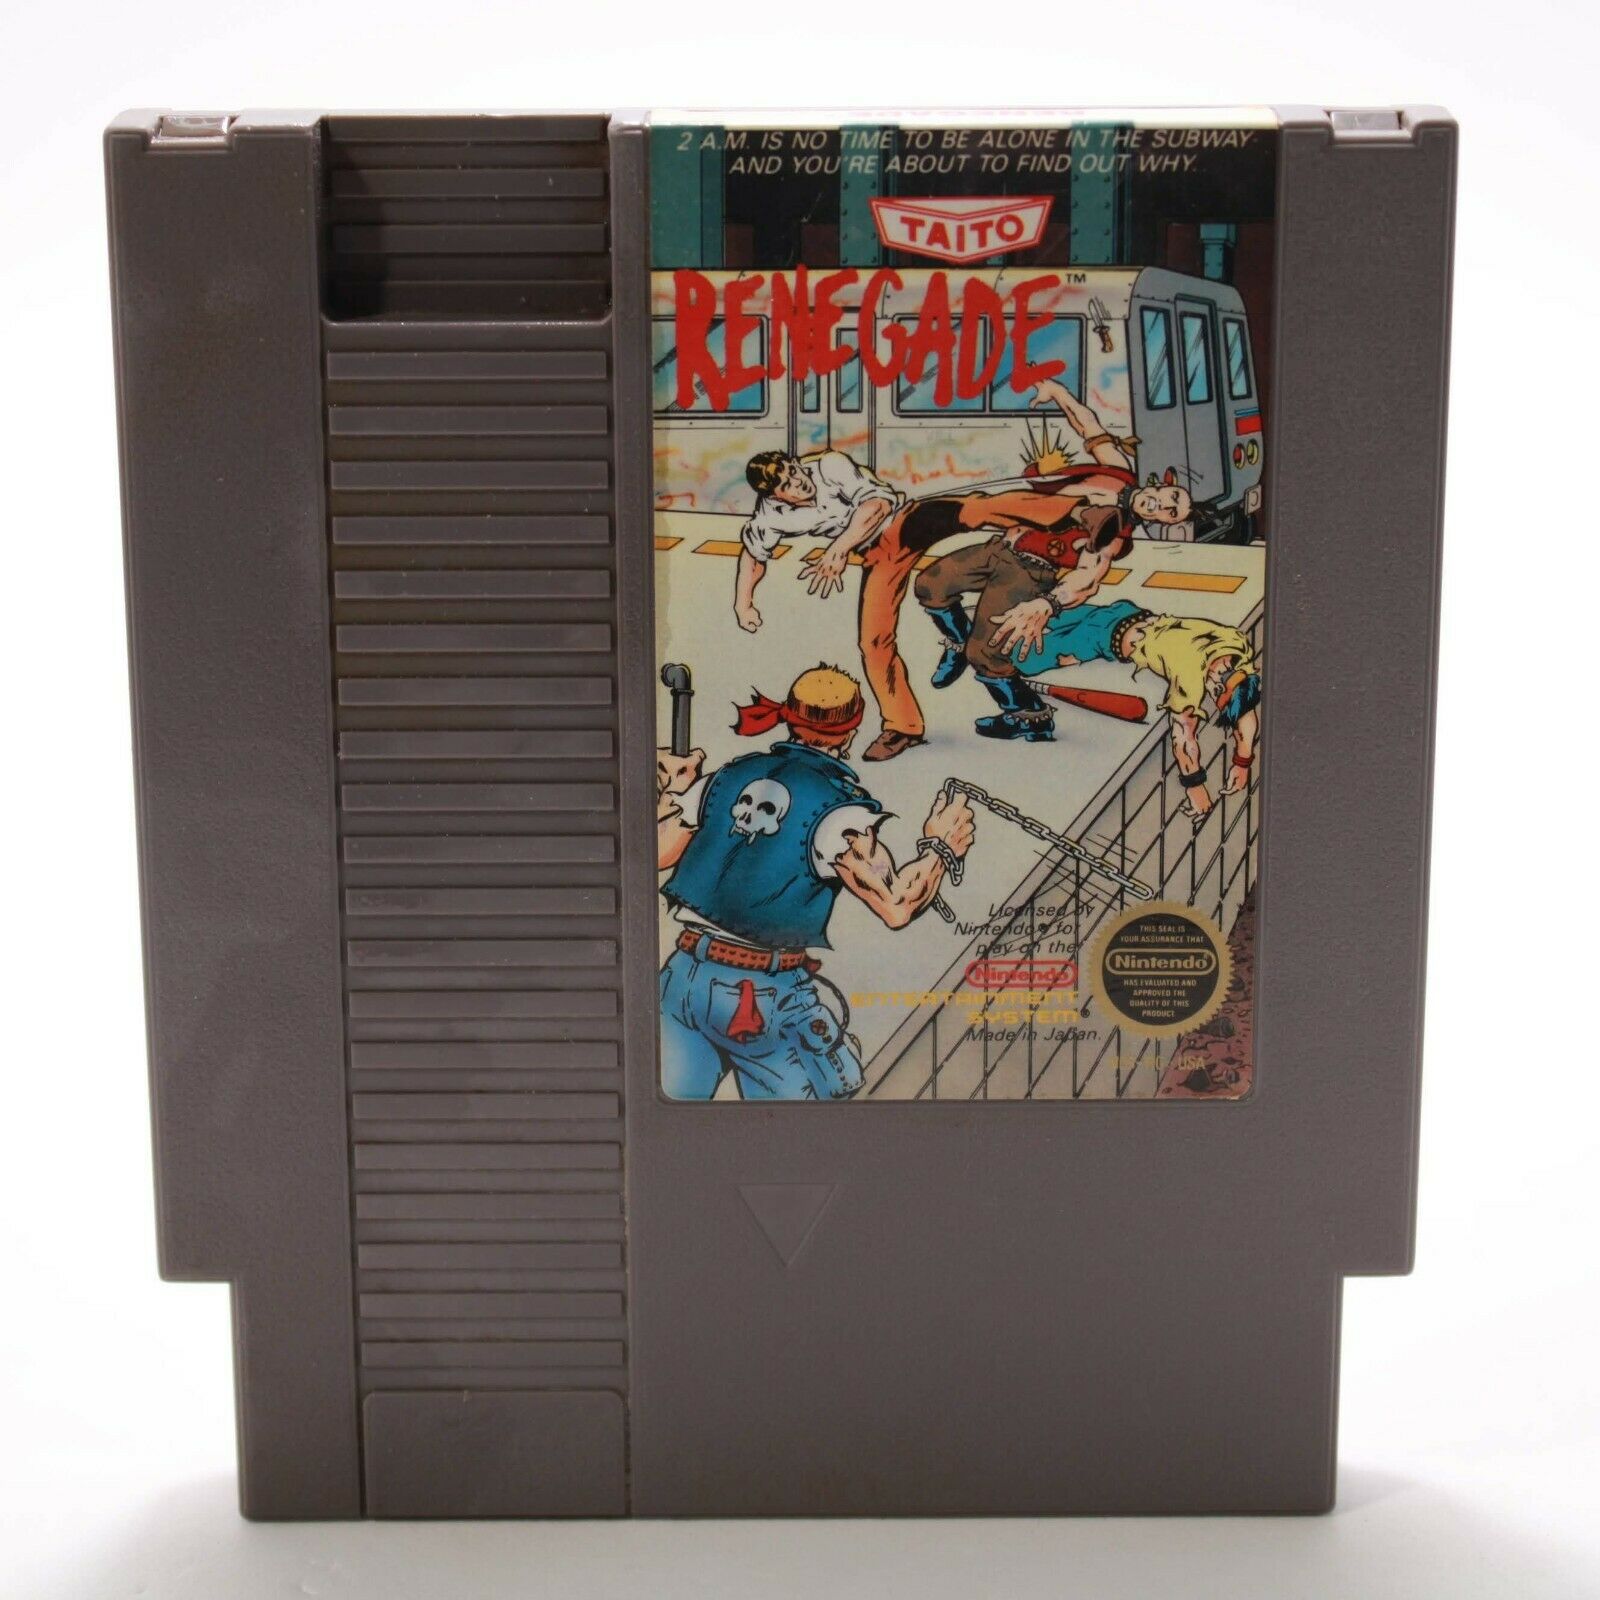 Nintendo NES - Renegade - Cleaned, Tested & Working